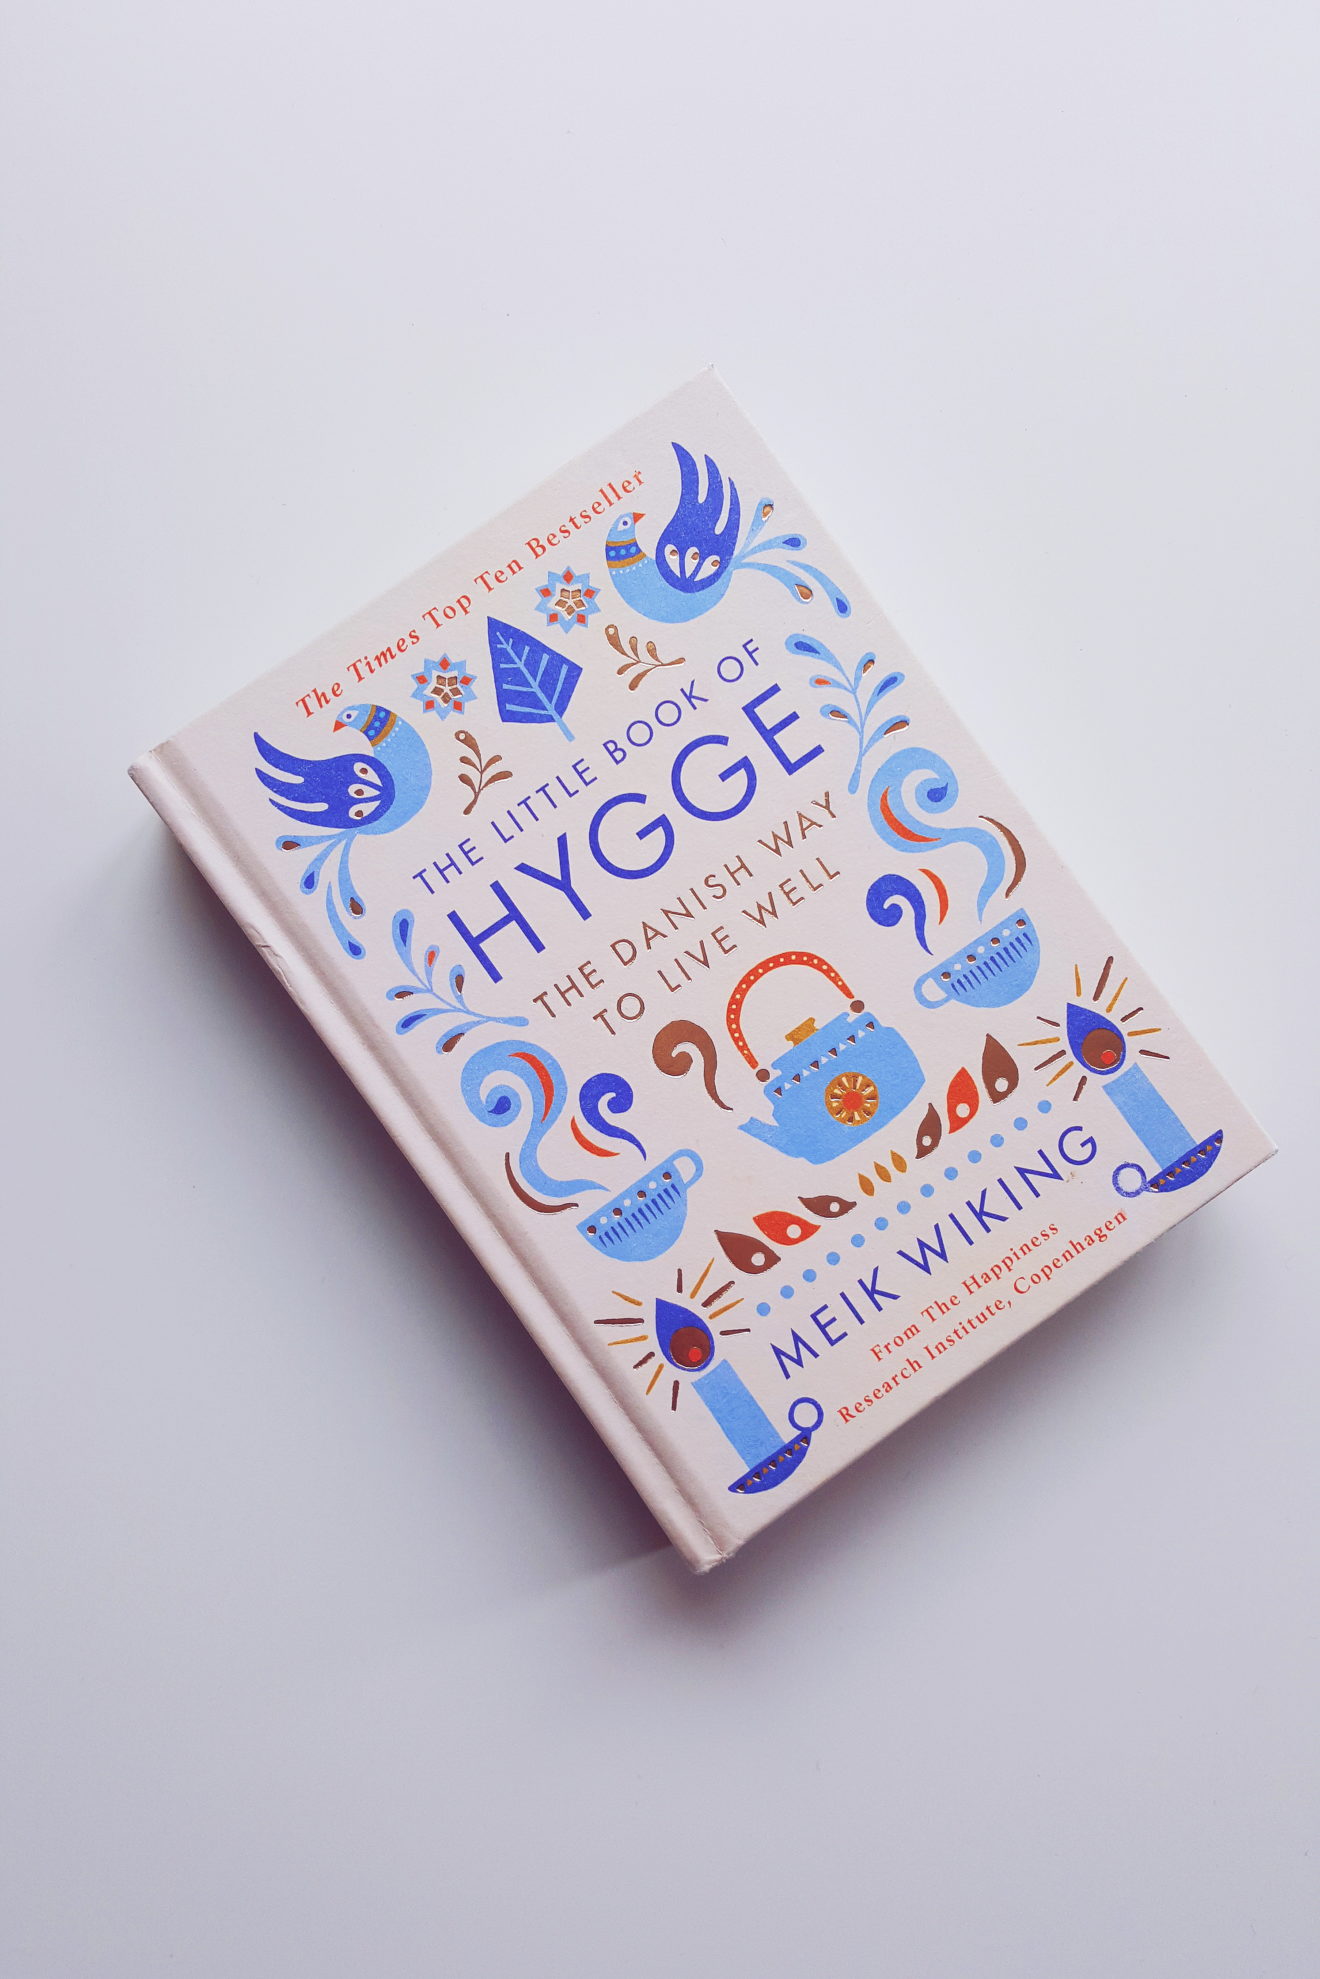 the little book of hygge, the danish way to live well, meik wiking, recenzie deboratentis.ro